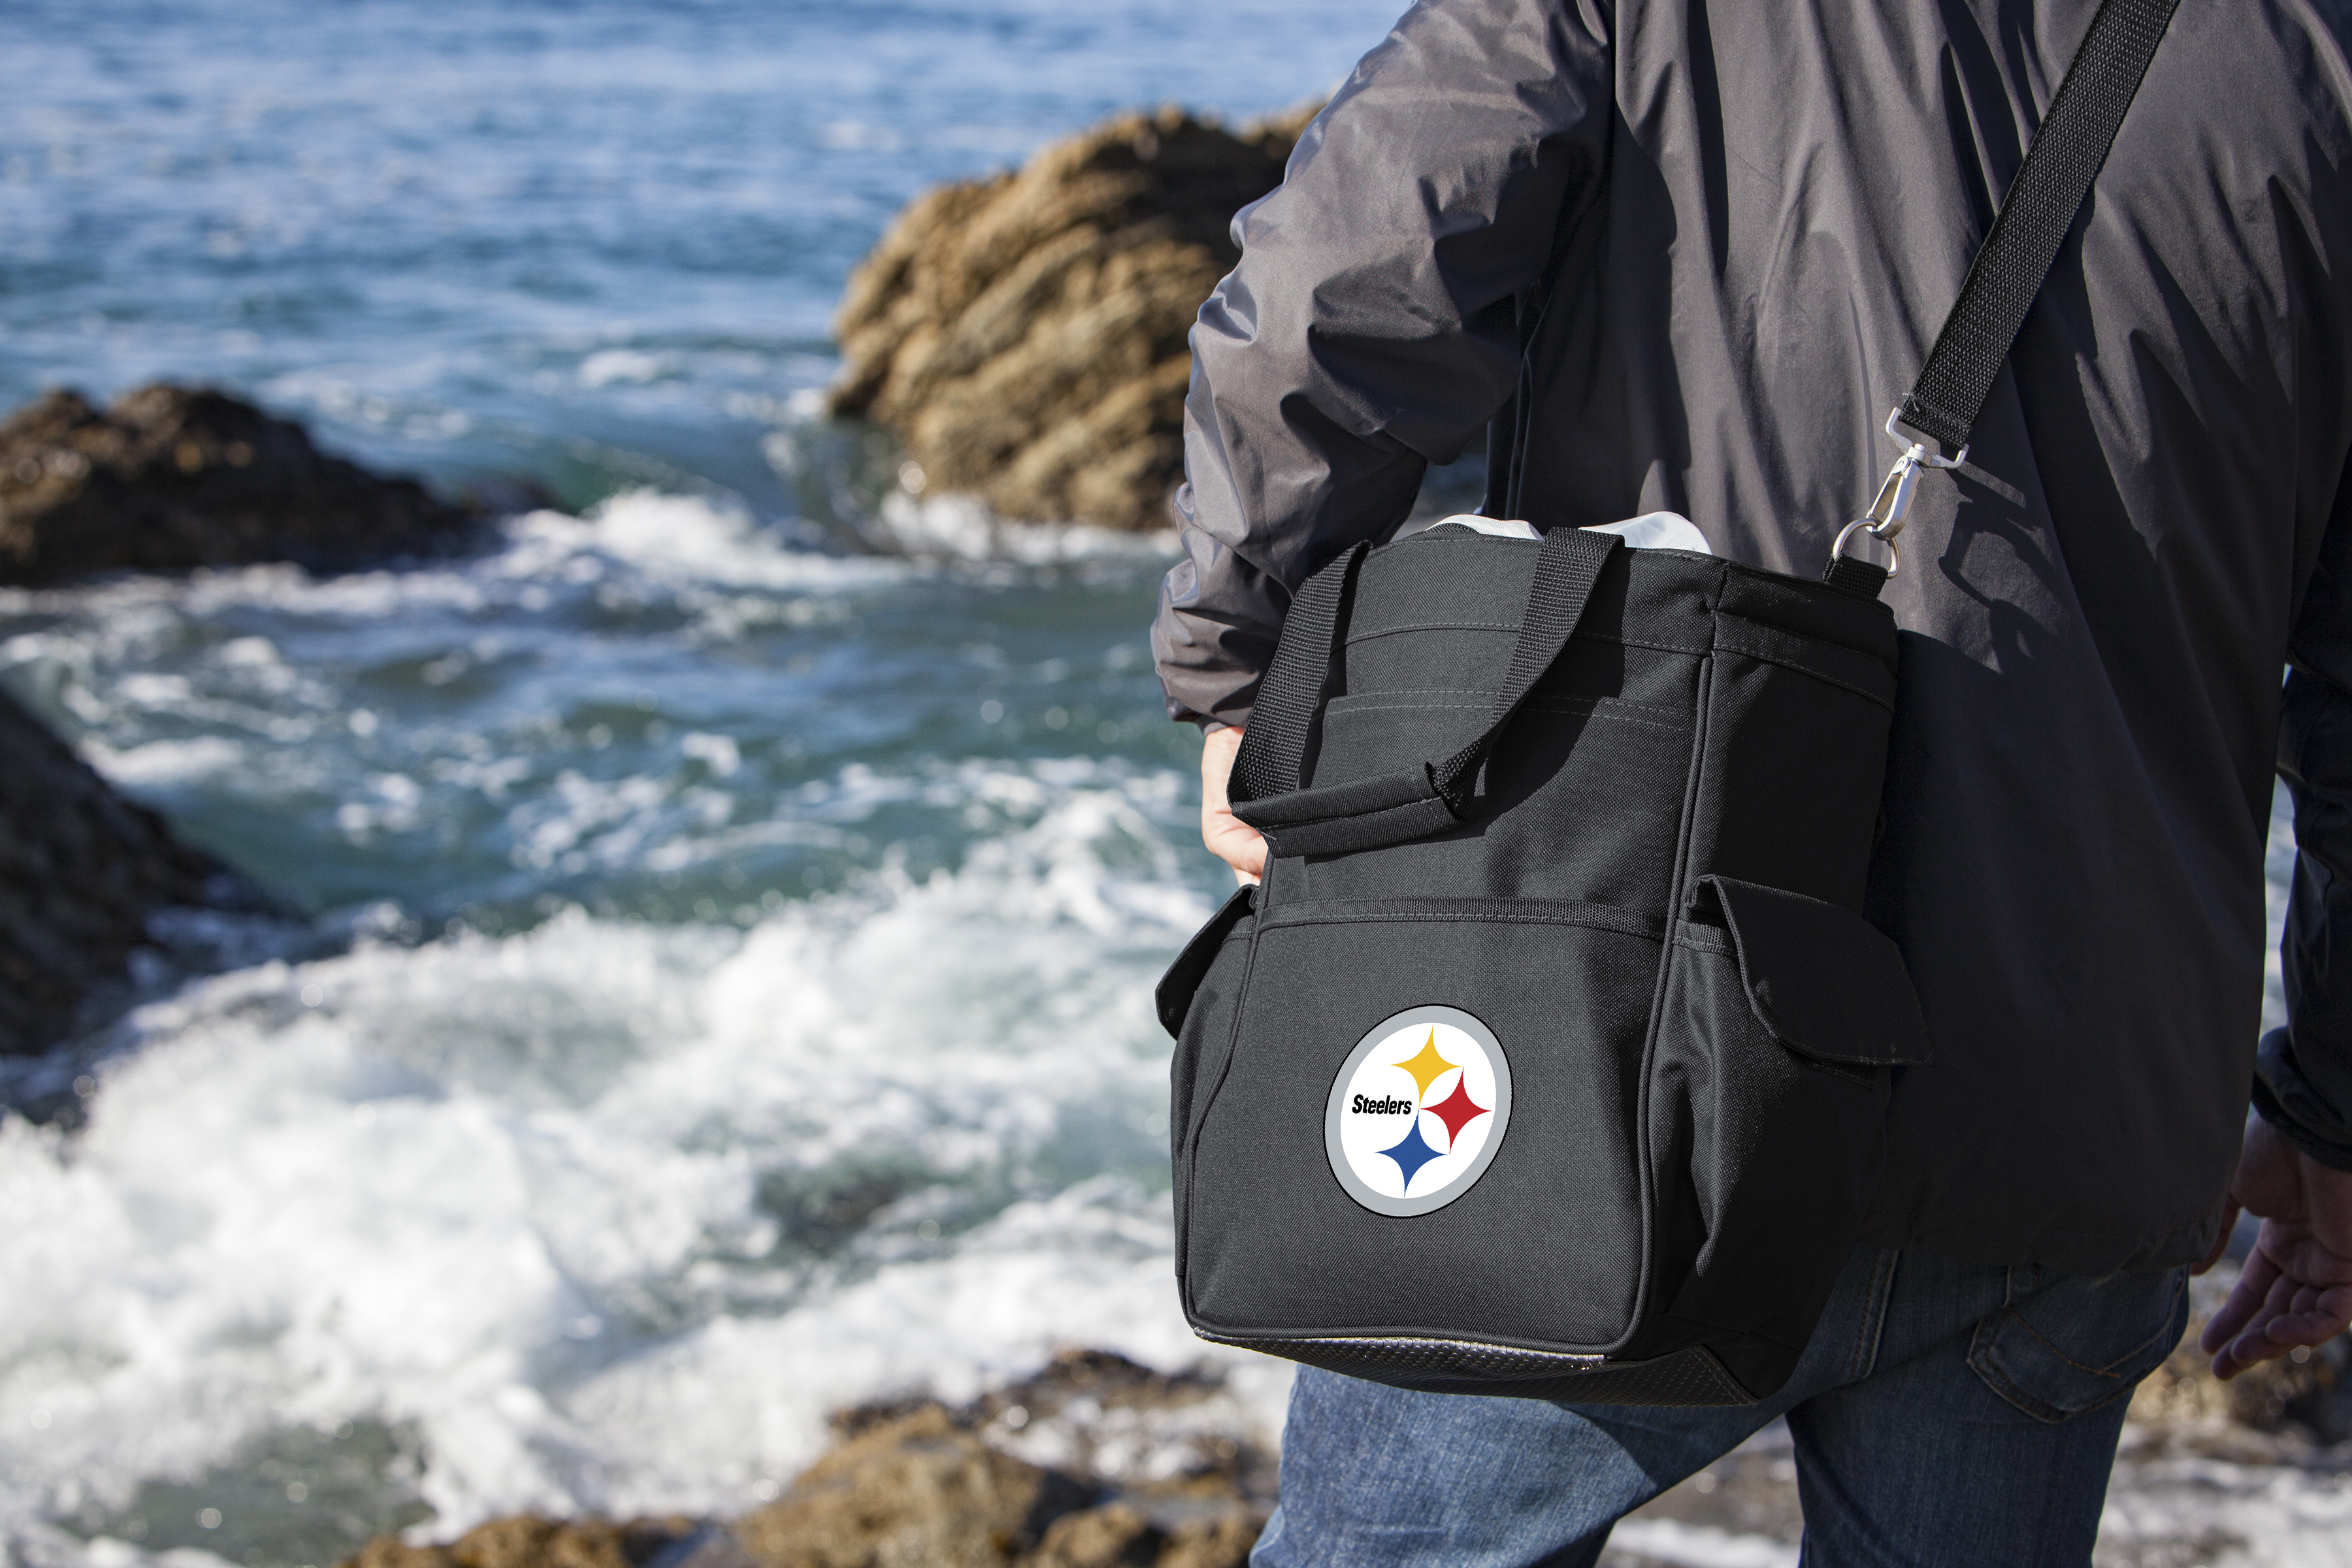 Pittsburgh Steelers - Activo Cooler Tote Bag